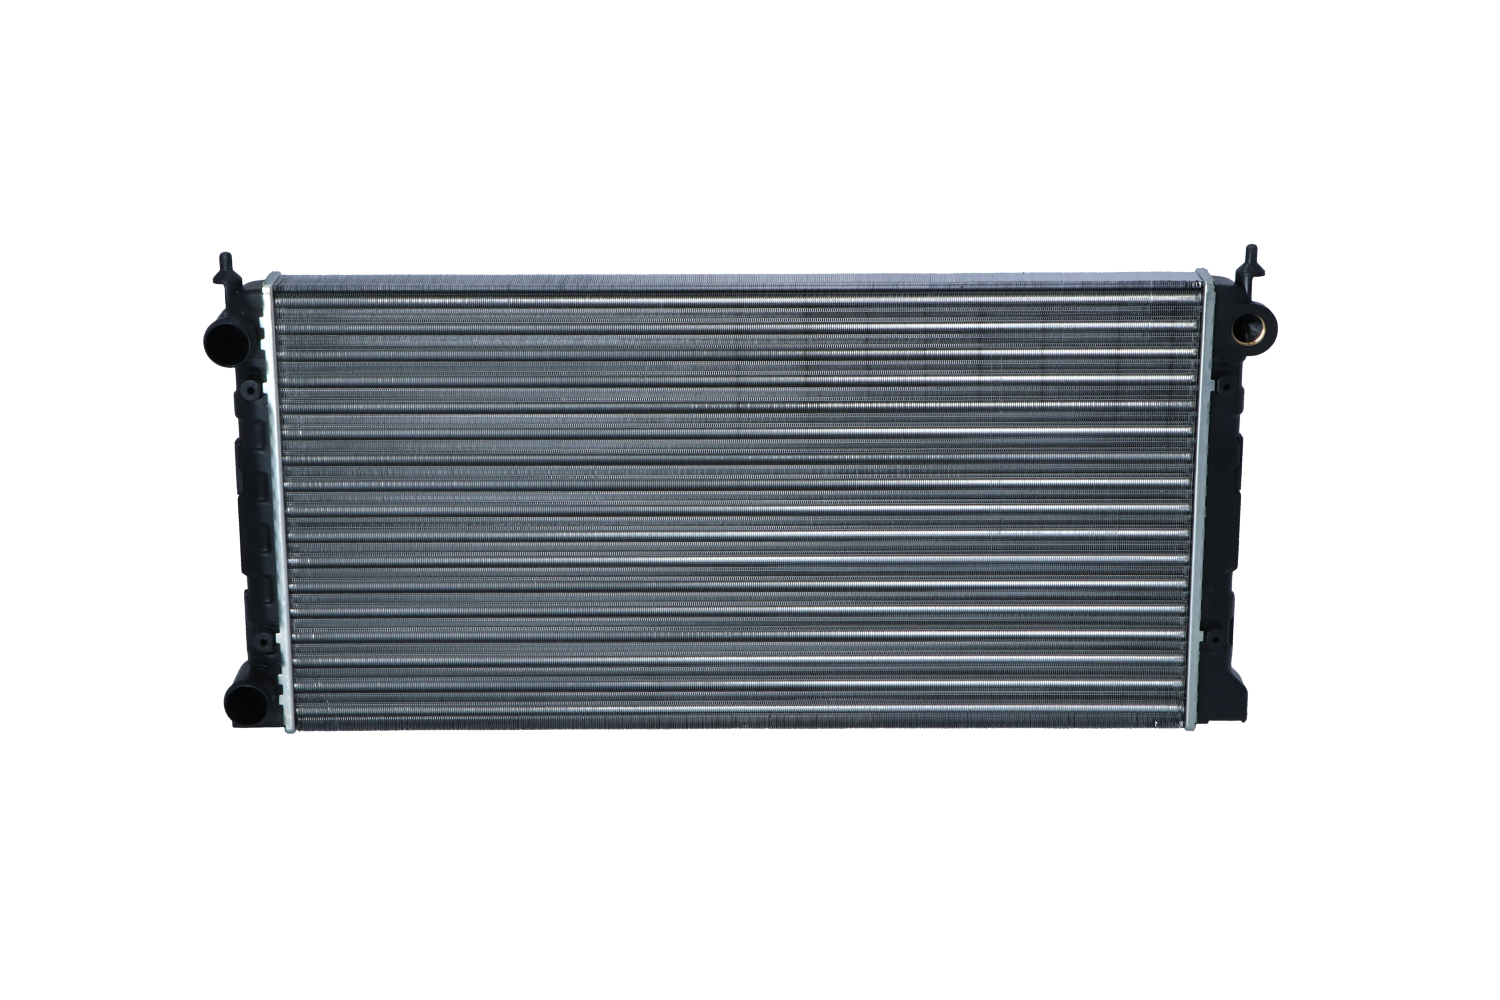 NRF 509506 Engine radiator Aluminium, 630 x 322 x 34 mm, Mechanically jointed cooling fins